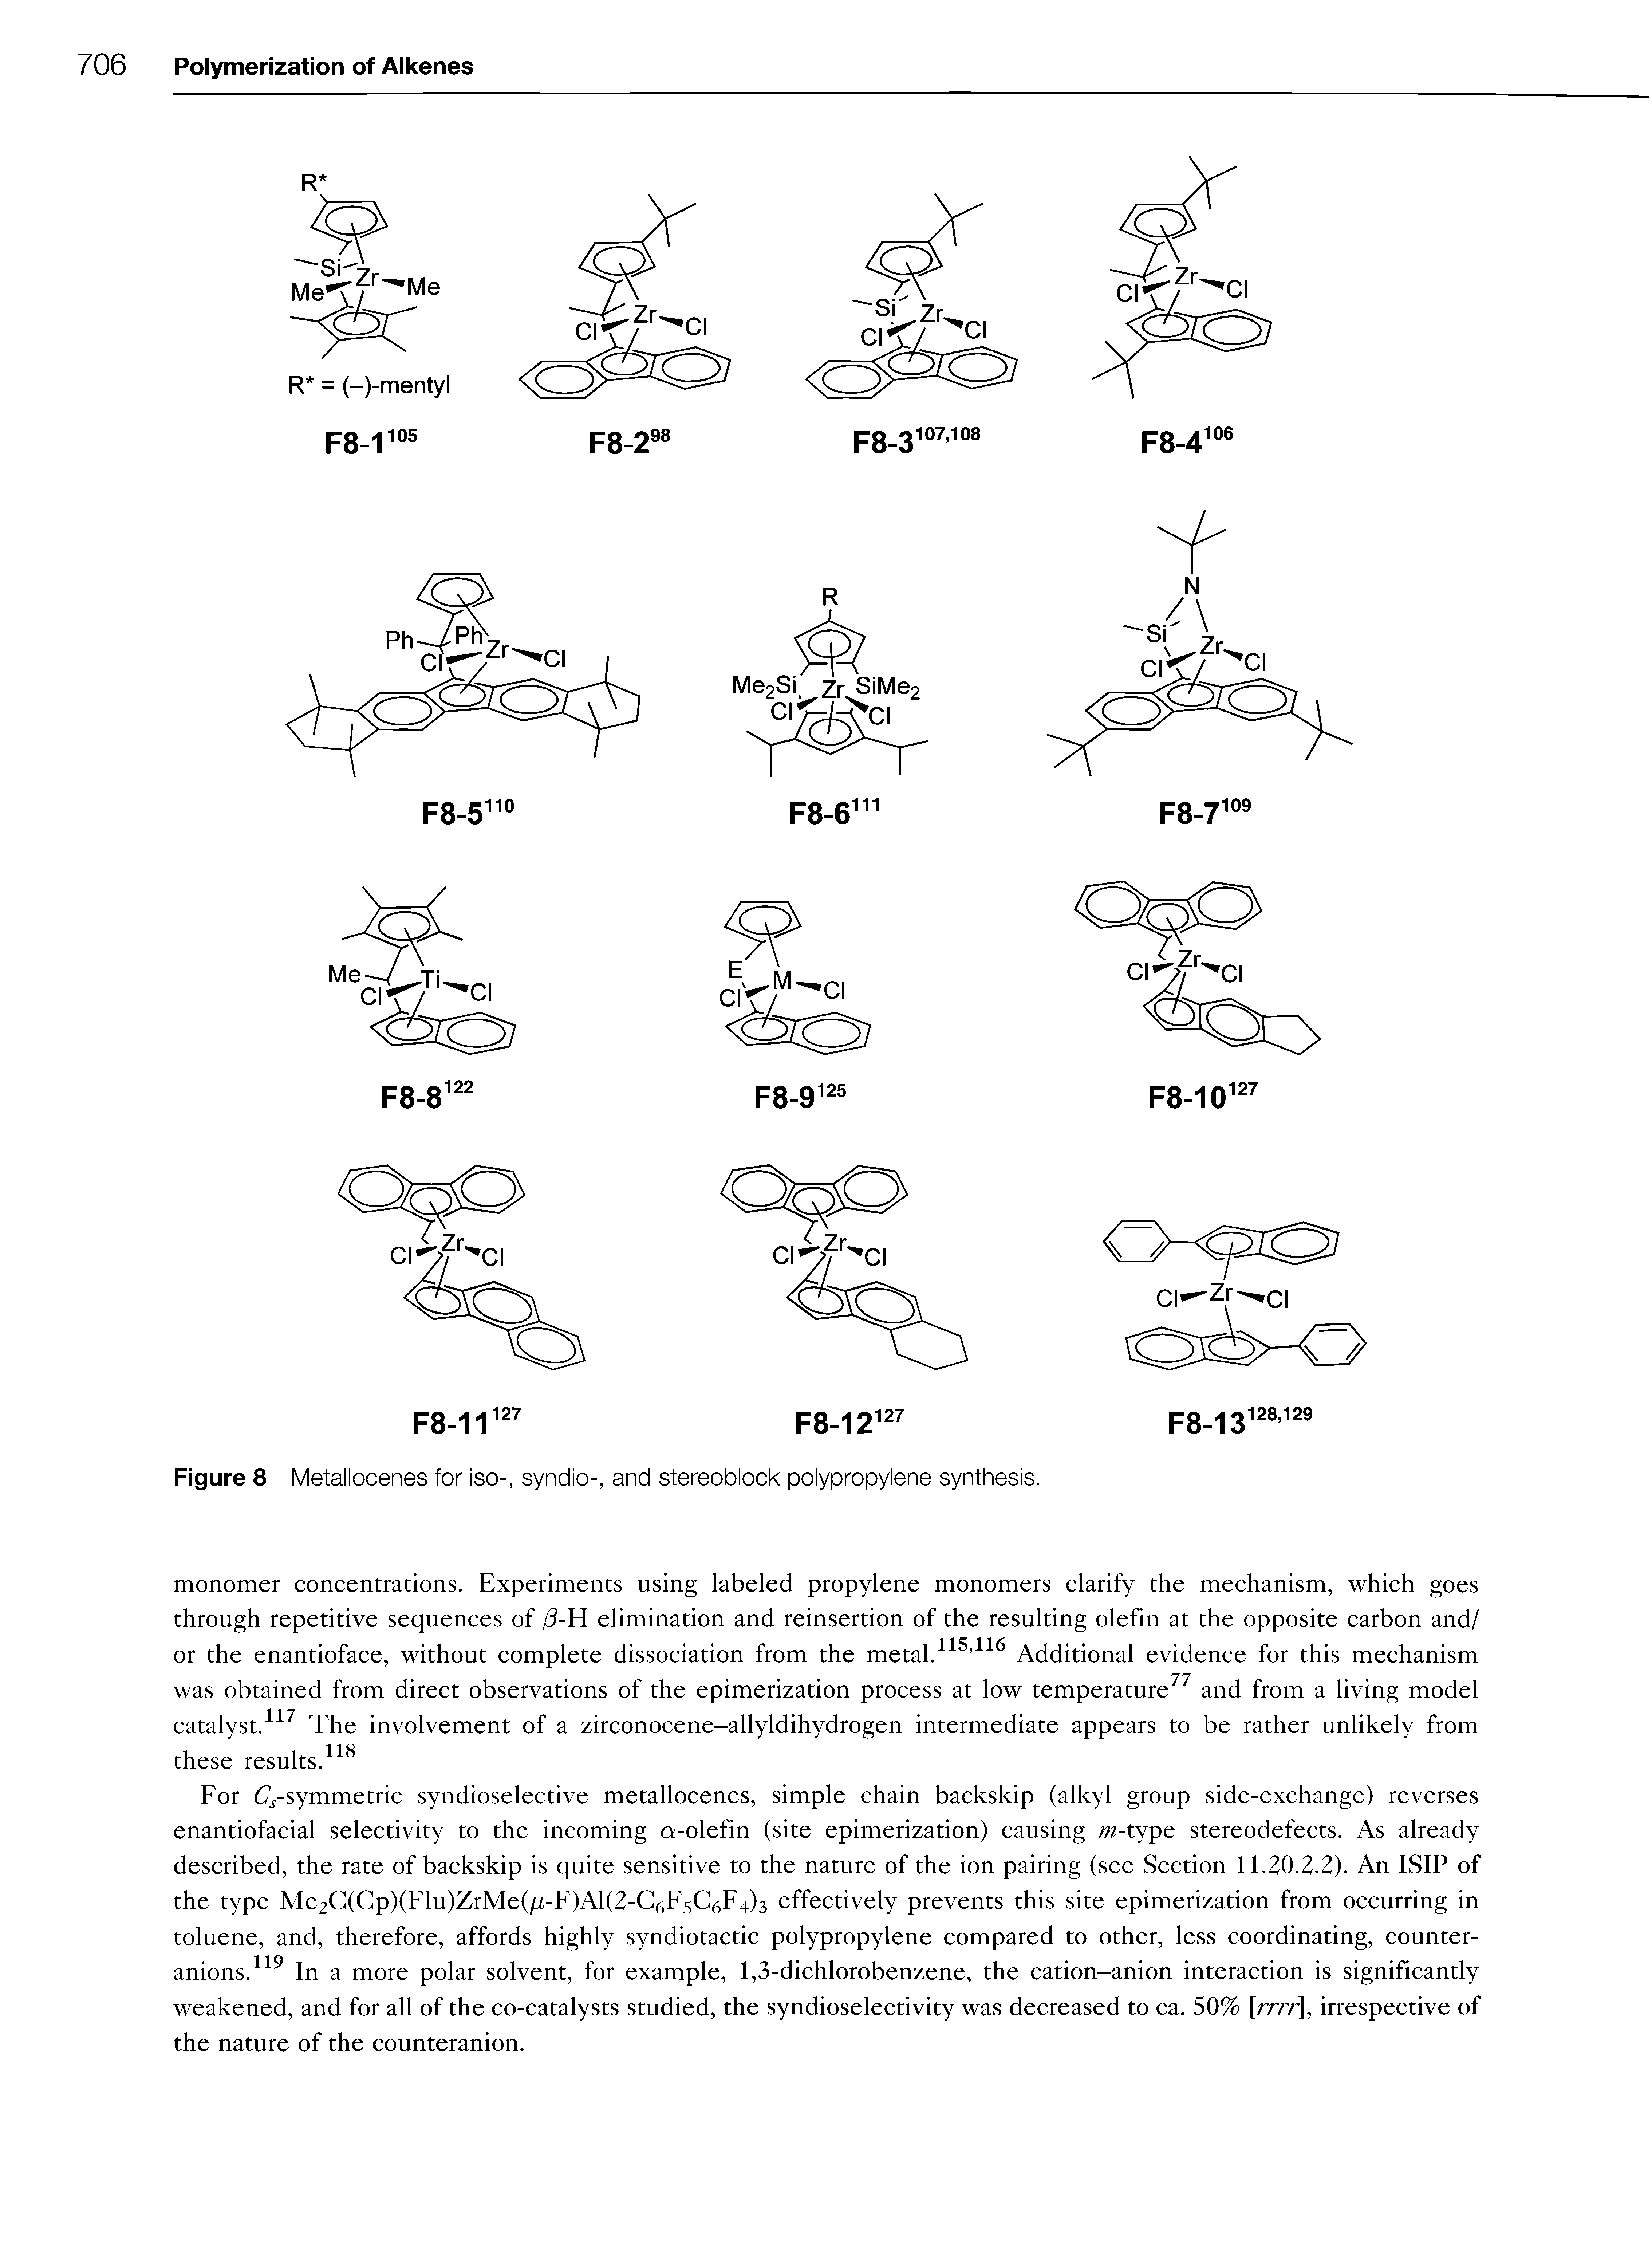 Figure 8 Metallocenes for iso-, syndic-, and stereoblock polypropylene synthesis.